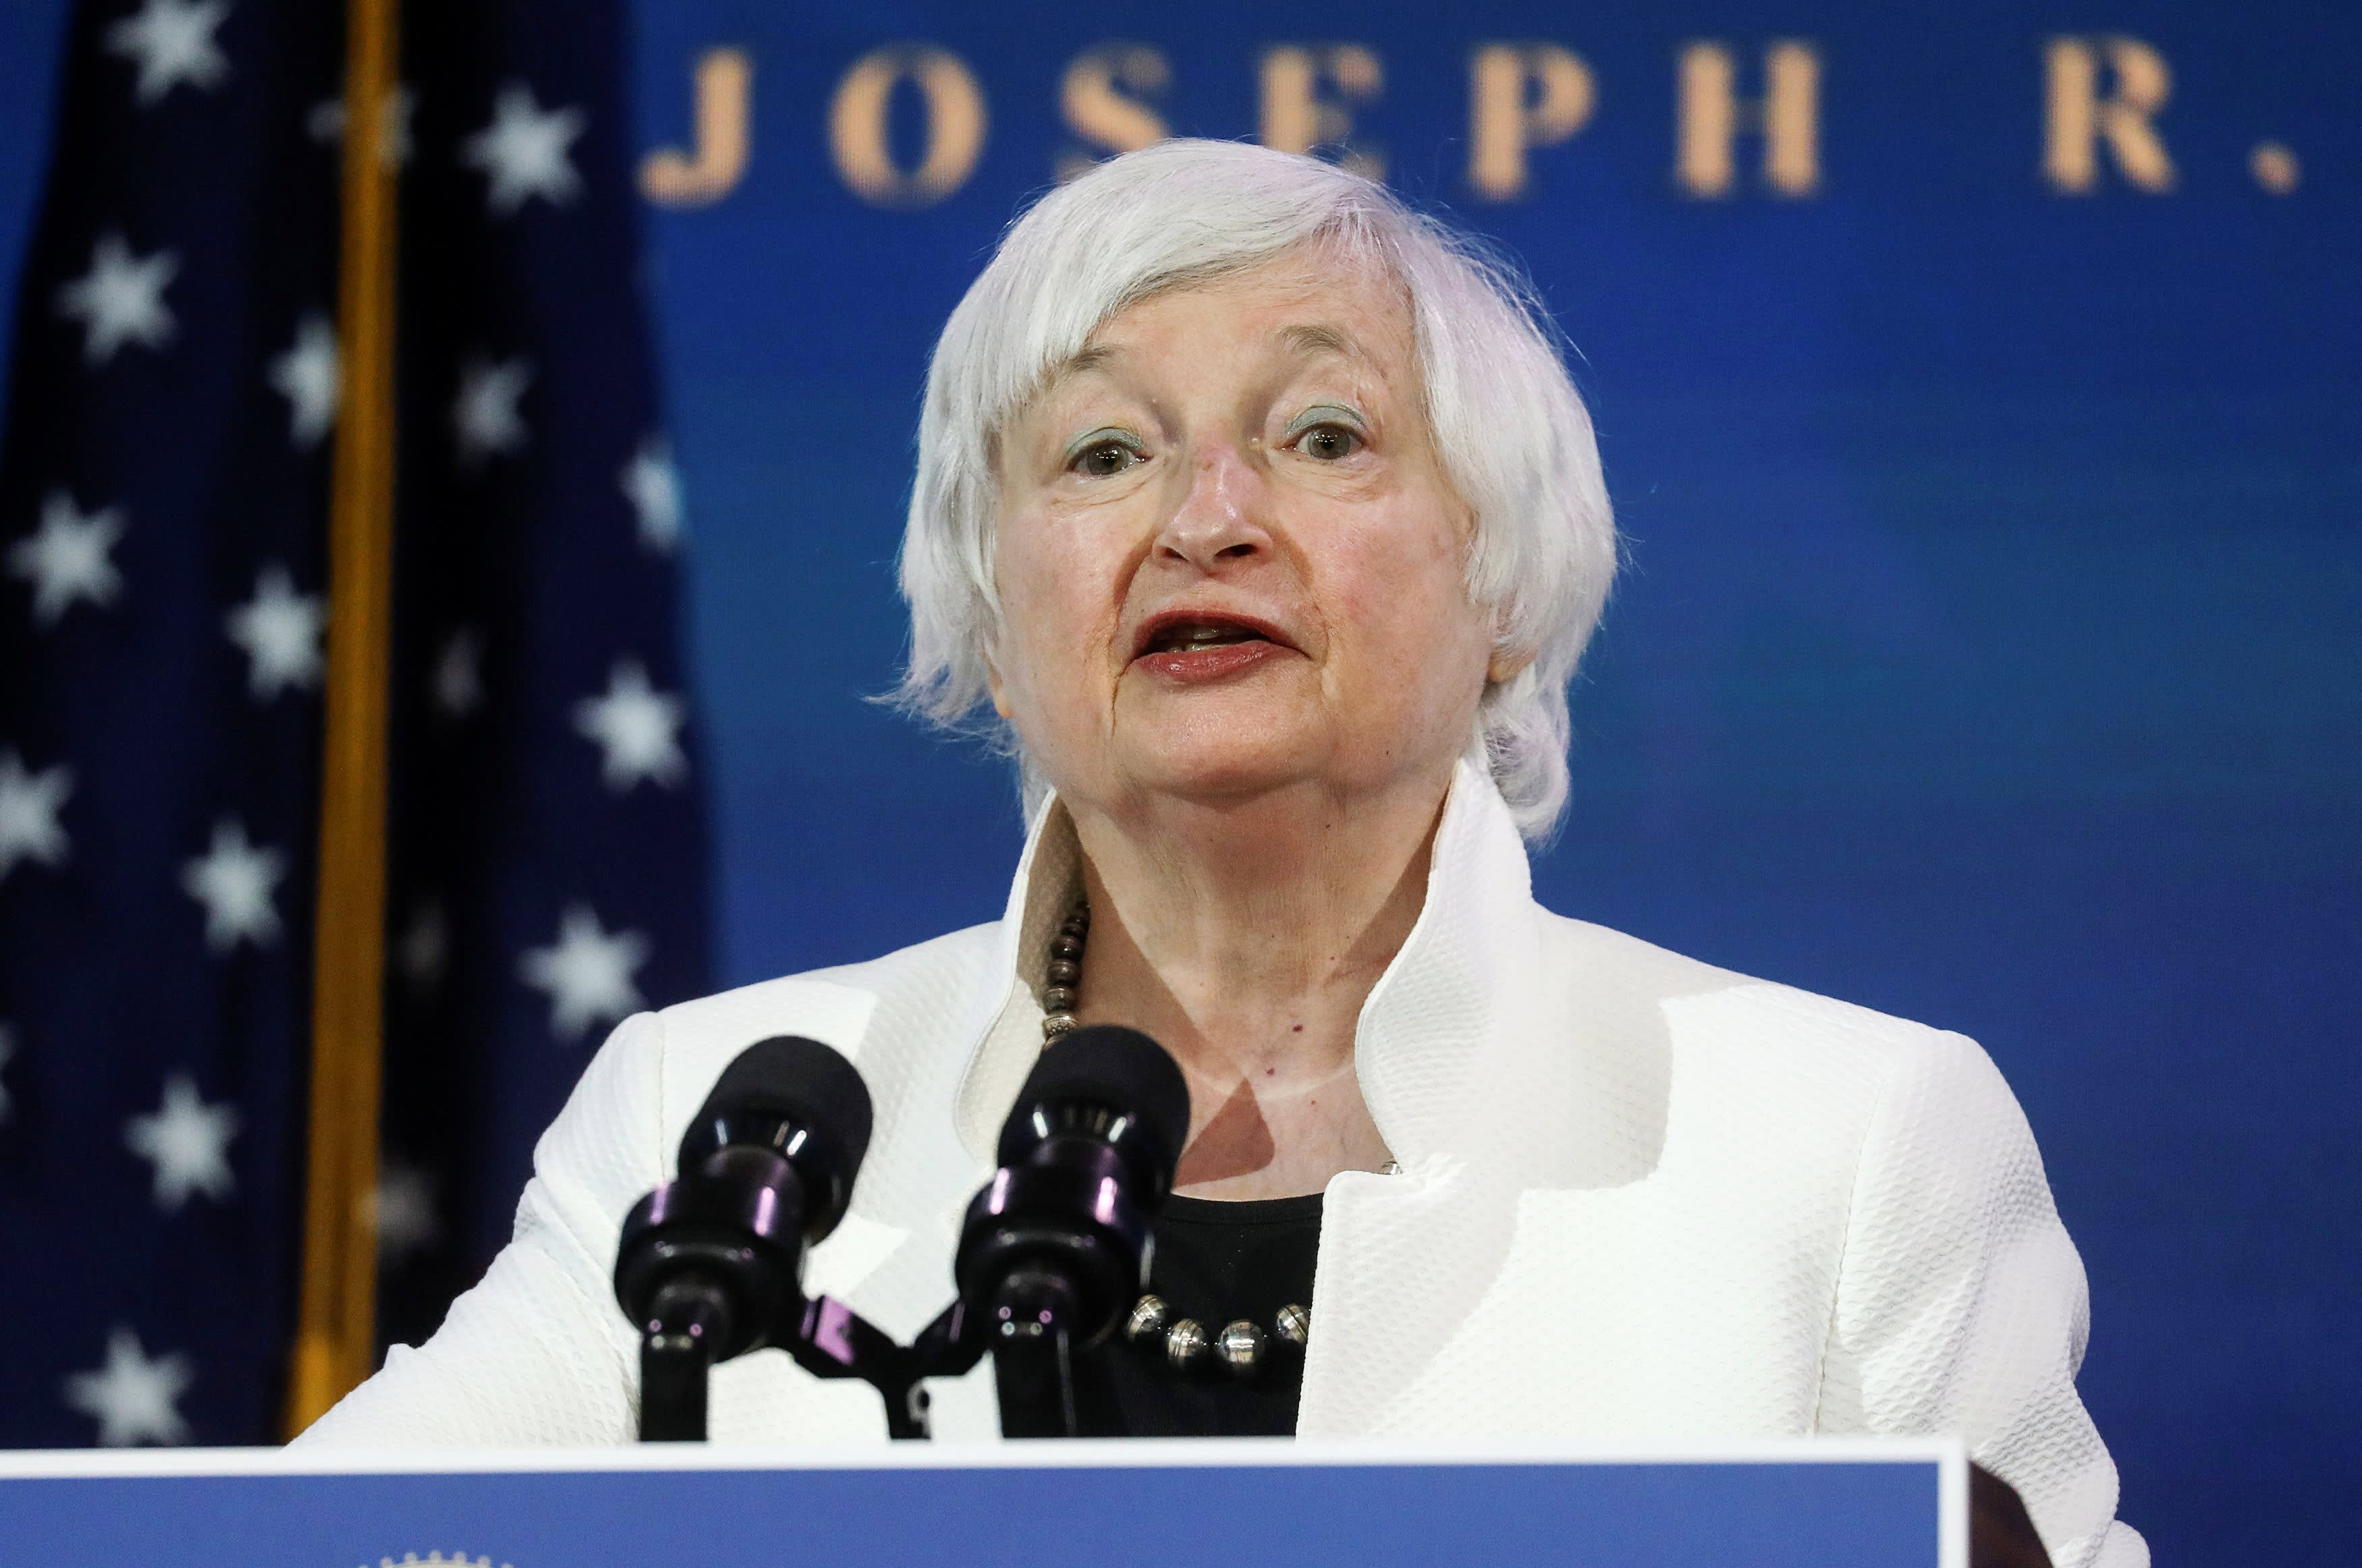 Janet Yellen’s appointment as first female Treasury secretary resolves the Senate’s main hurdle